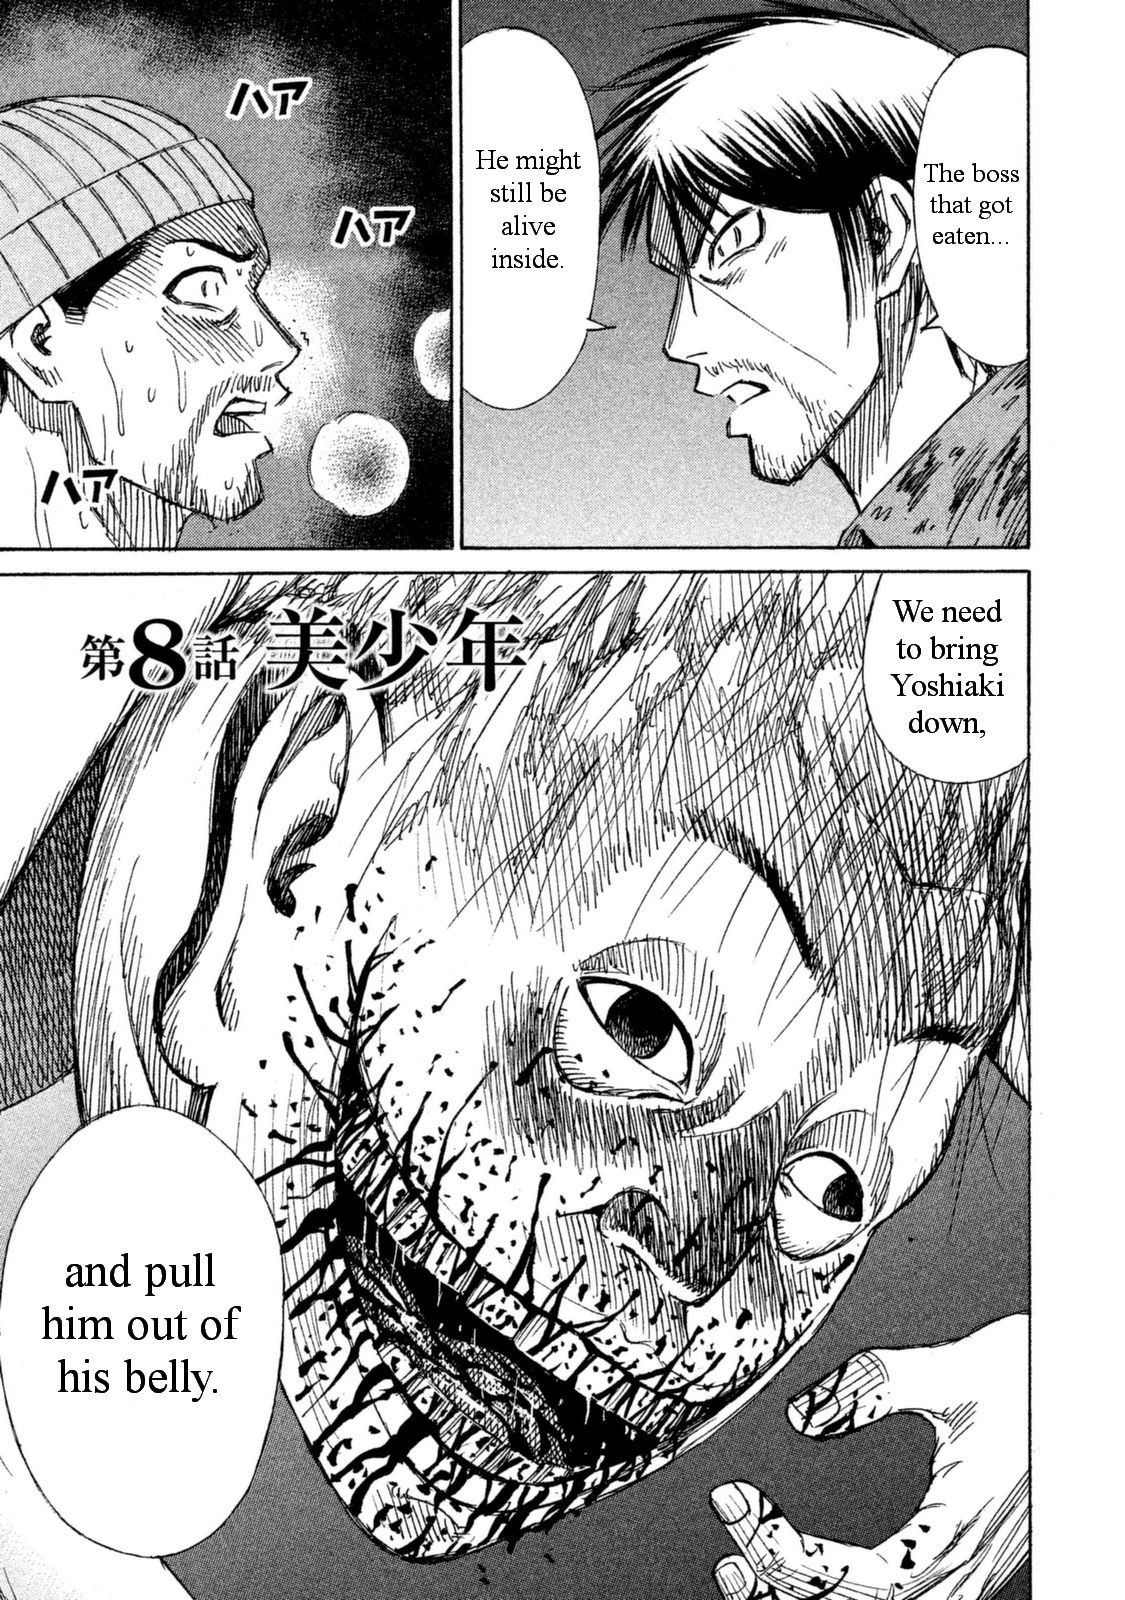 Higanjima - 48 Days Later Vol.1 Chapter 8: The Evil Within - Picture 2